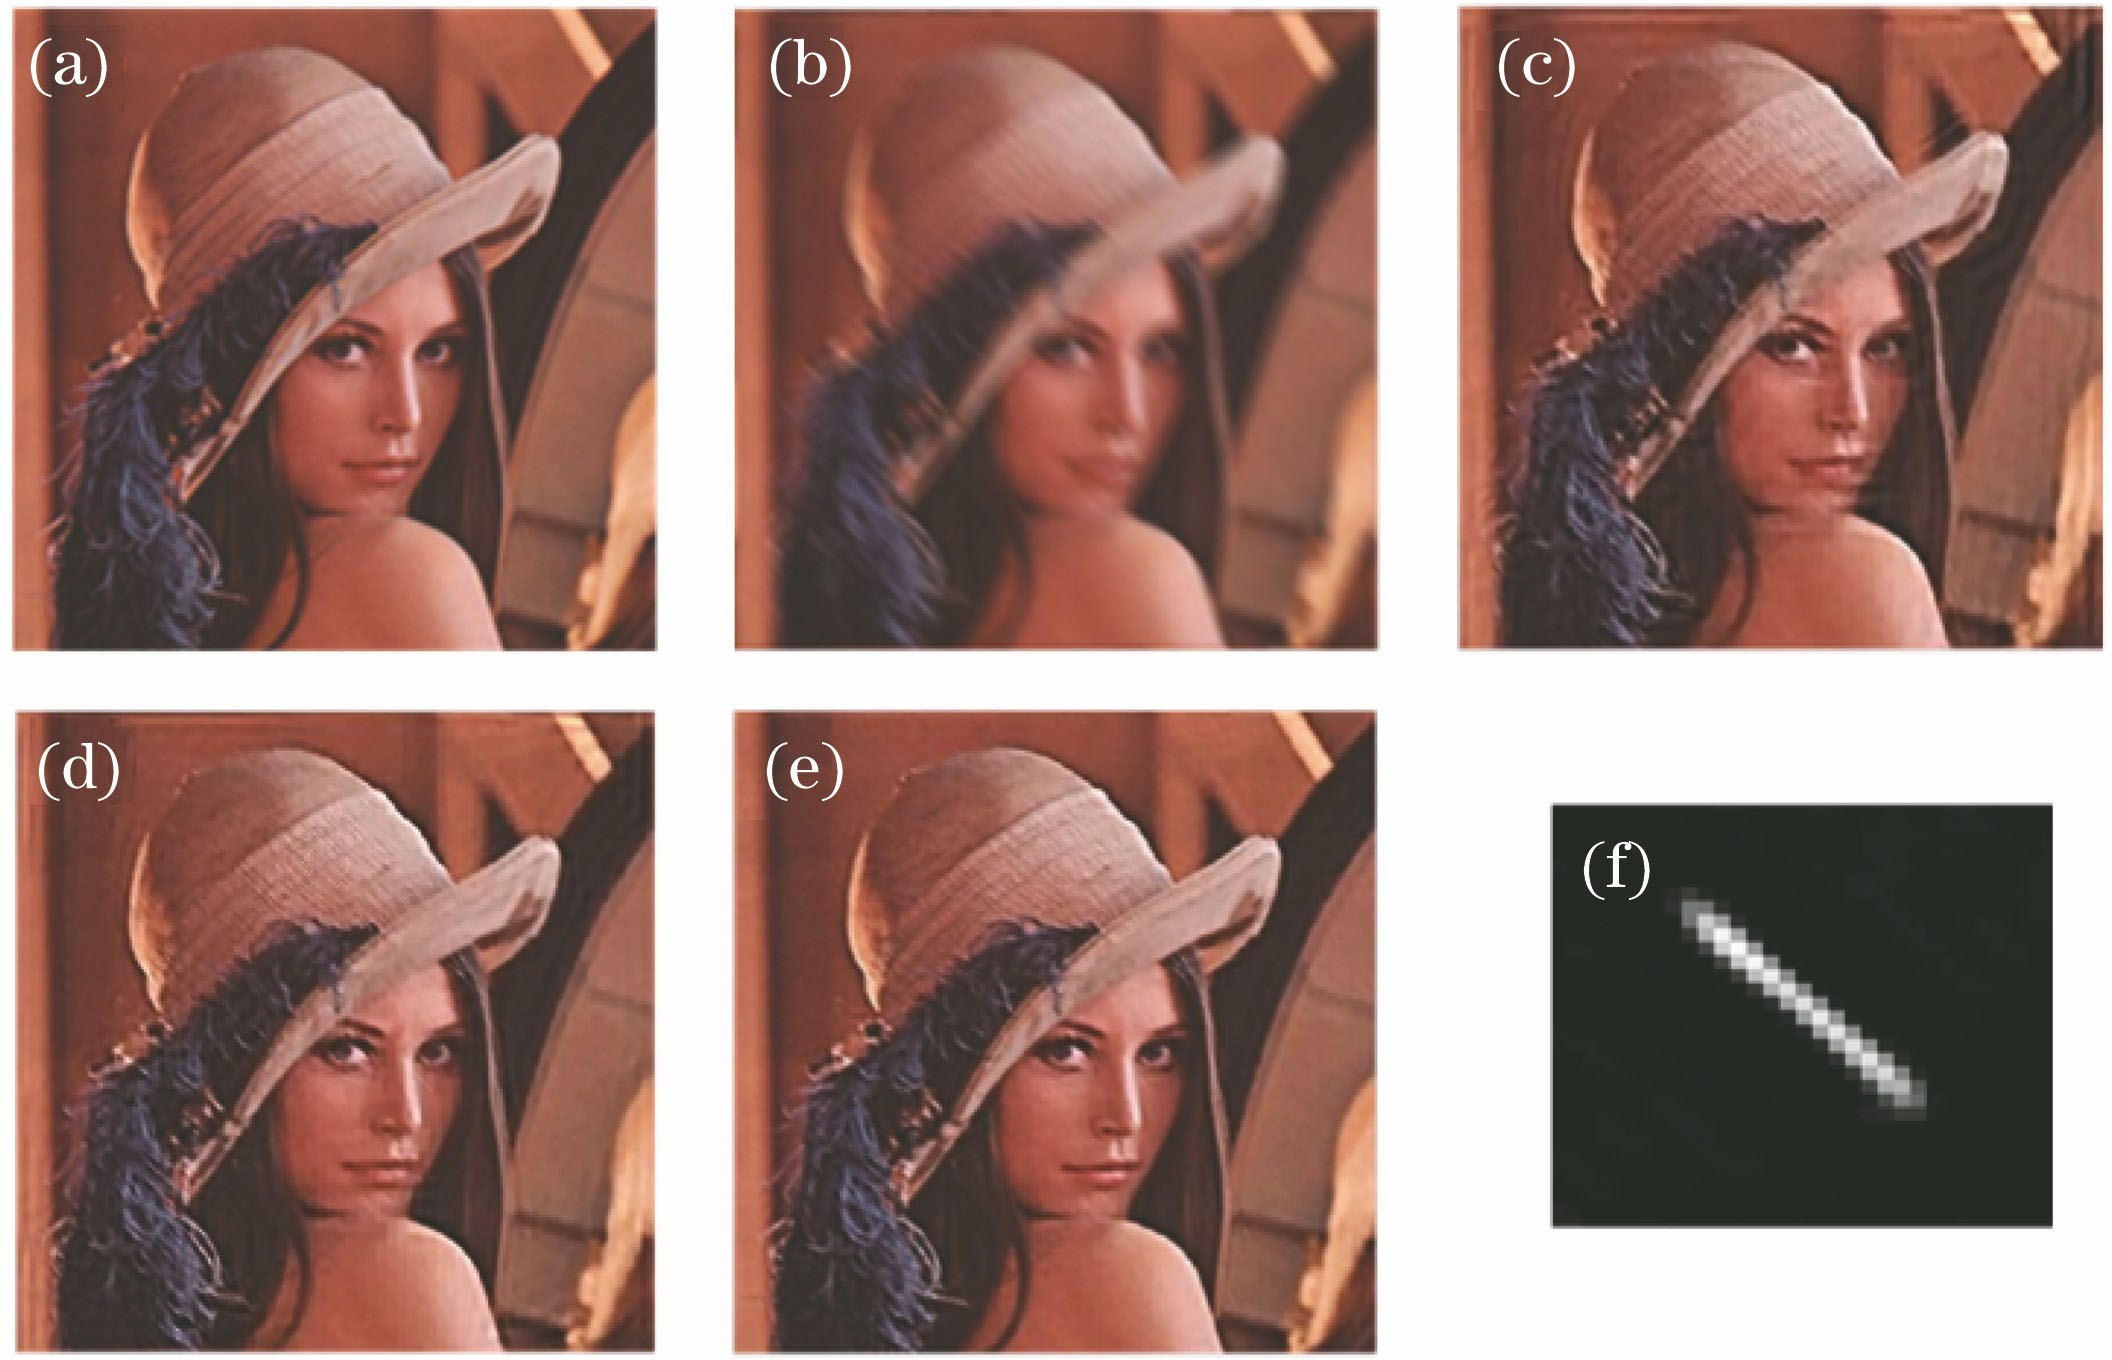 Comparison results of the blind recovery of blurred images for Lena with kernel K1. (a) Original image; (b) blurred image with kernel K1; (c) method of Ref.[9]; (d) method of Ref.[19]; (e) proposed method; (f) blurred kernel estimated by proposed method